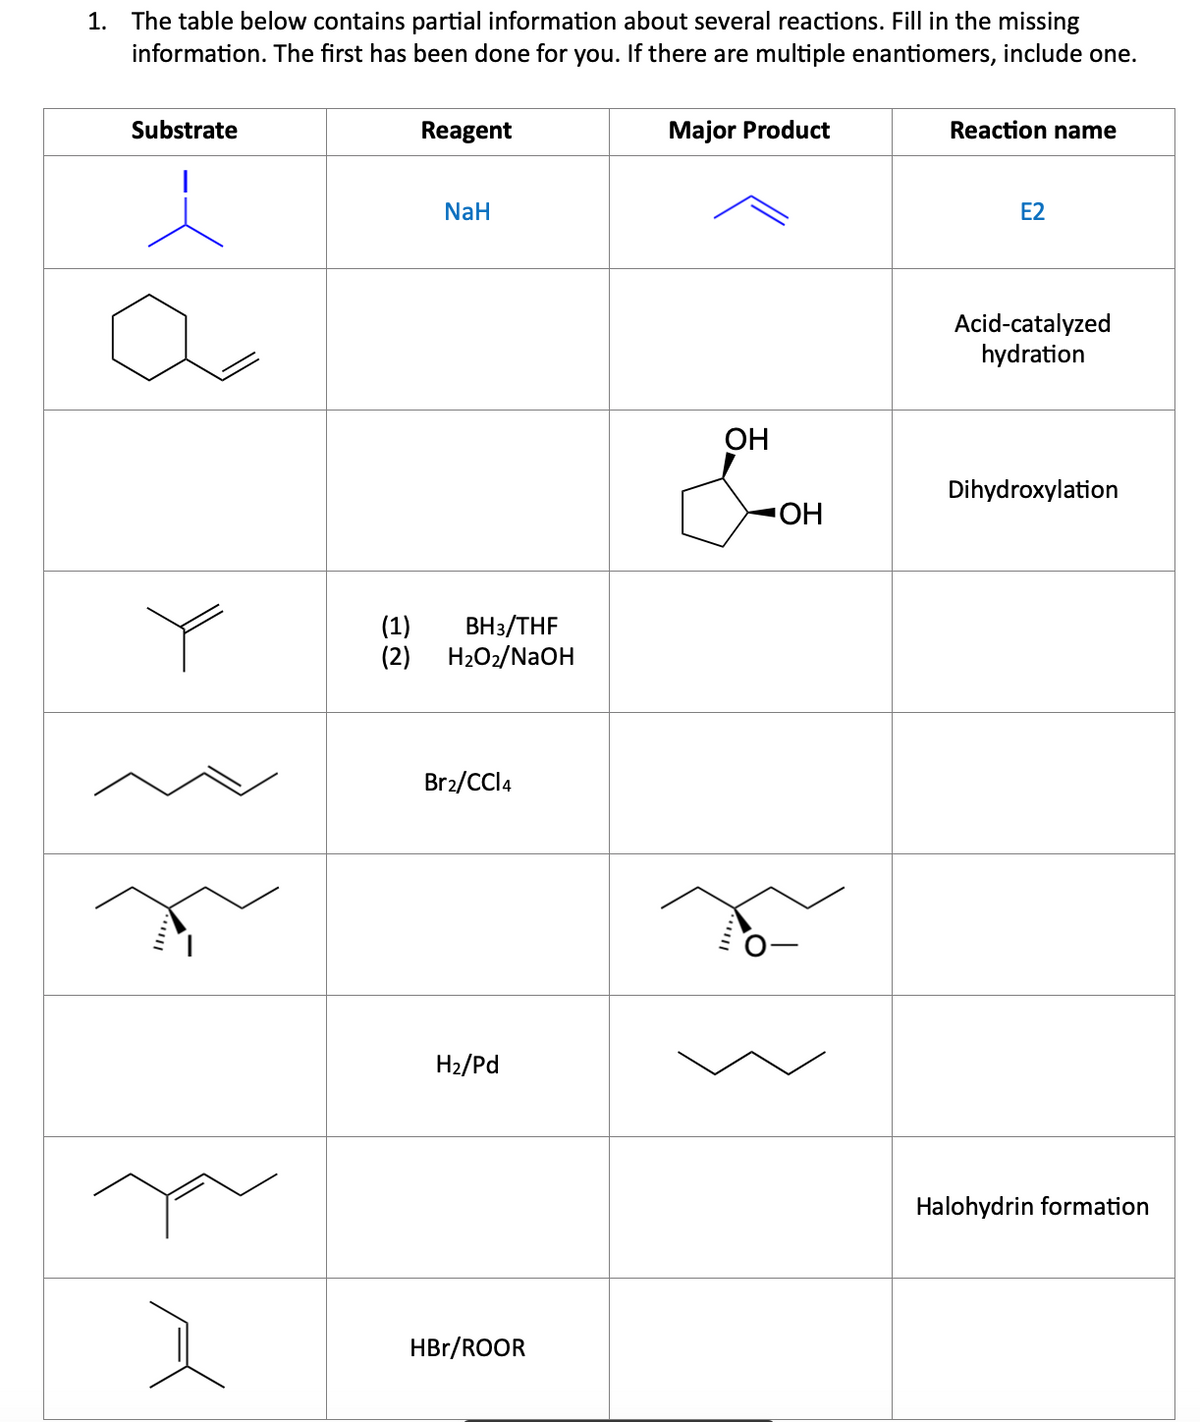 1. The table below contains partial information about several reactions. Fill in the missing
information. The first has been done for you. If there are multiple enantiomers, include one.
Substrate
ㅗ
Y
Reagent
NaH
(1) BH 3/THF
(2) H₂O₂/NaOH
Br2/CCI4
H₂/Pd
HBr/ROOR
Major Product
OH
&
OH
Reaction name
E2
Acid-catalyzed
hydration
Dihydroxylation
Halohydrin formation